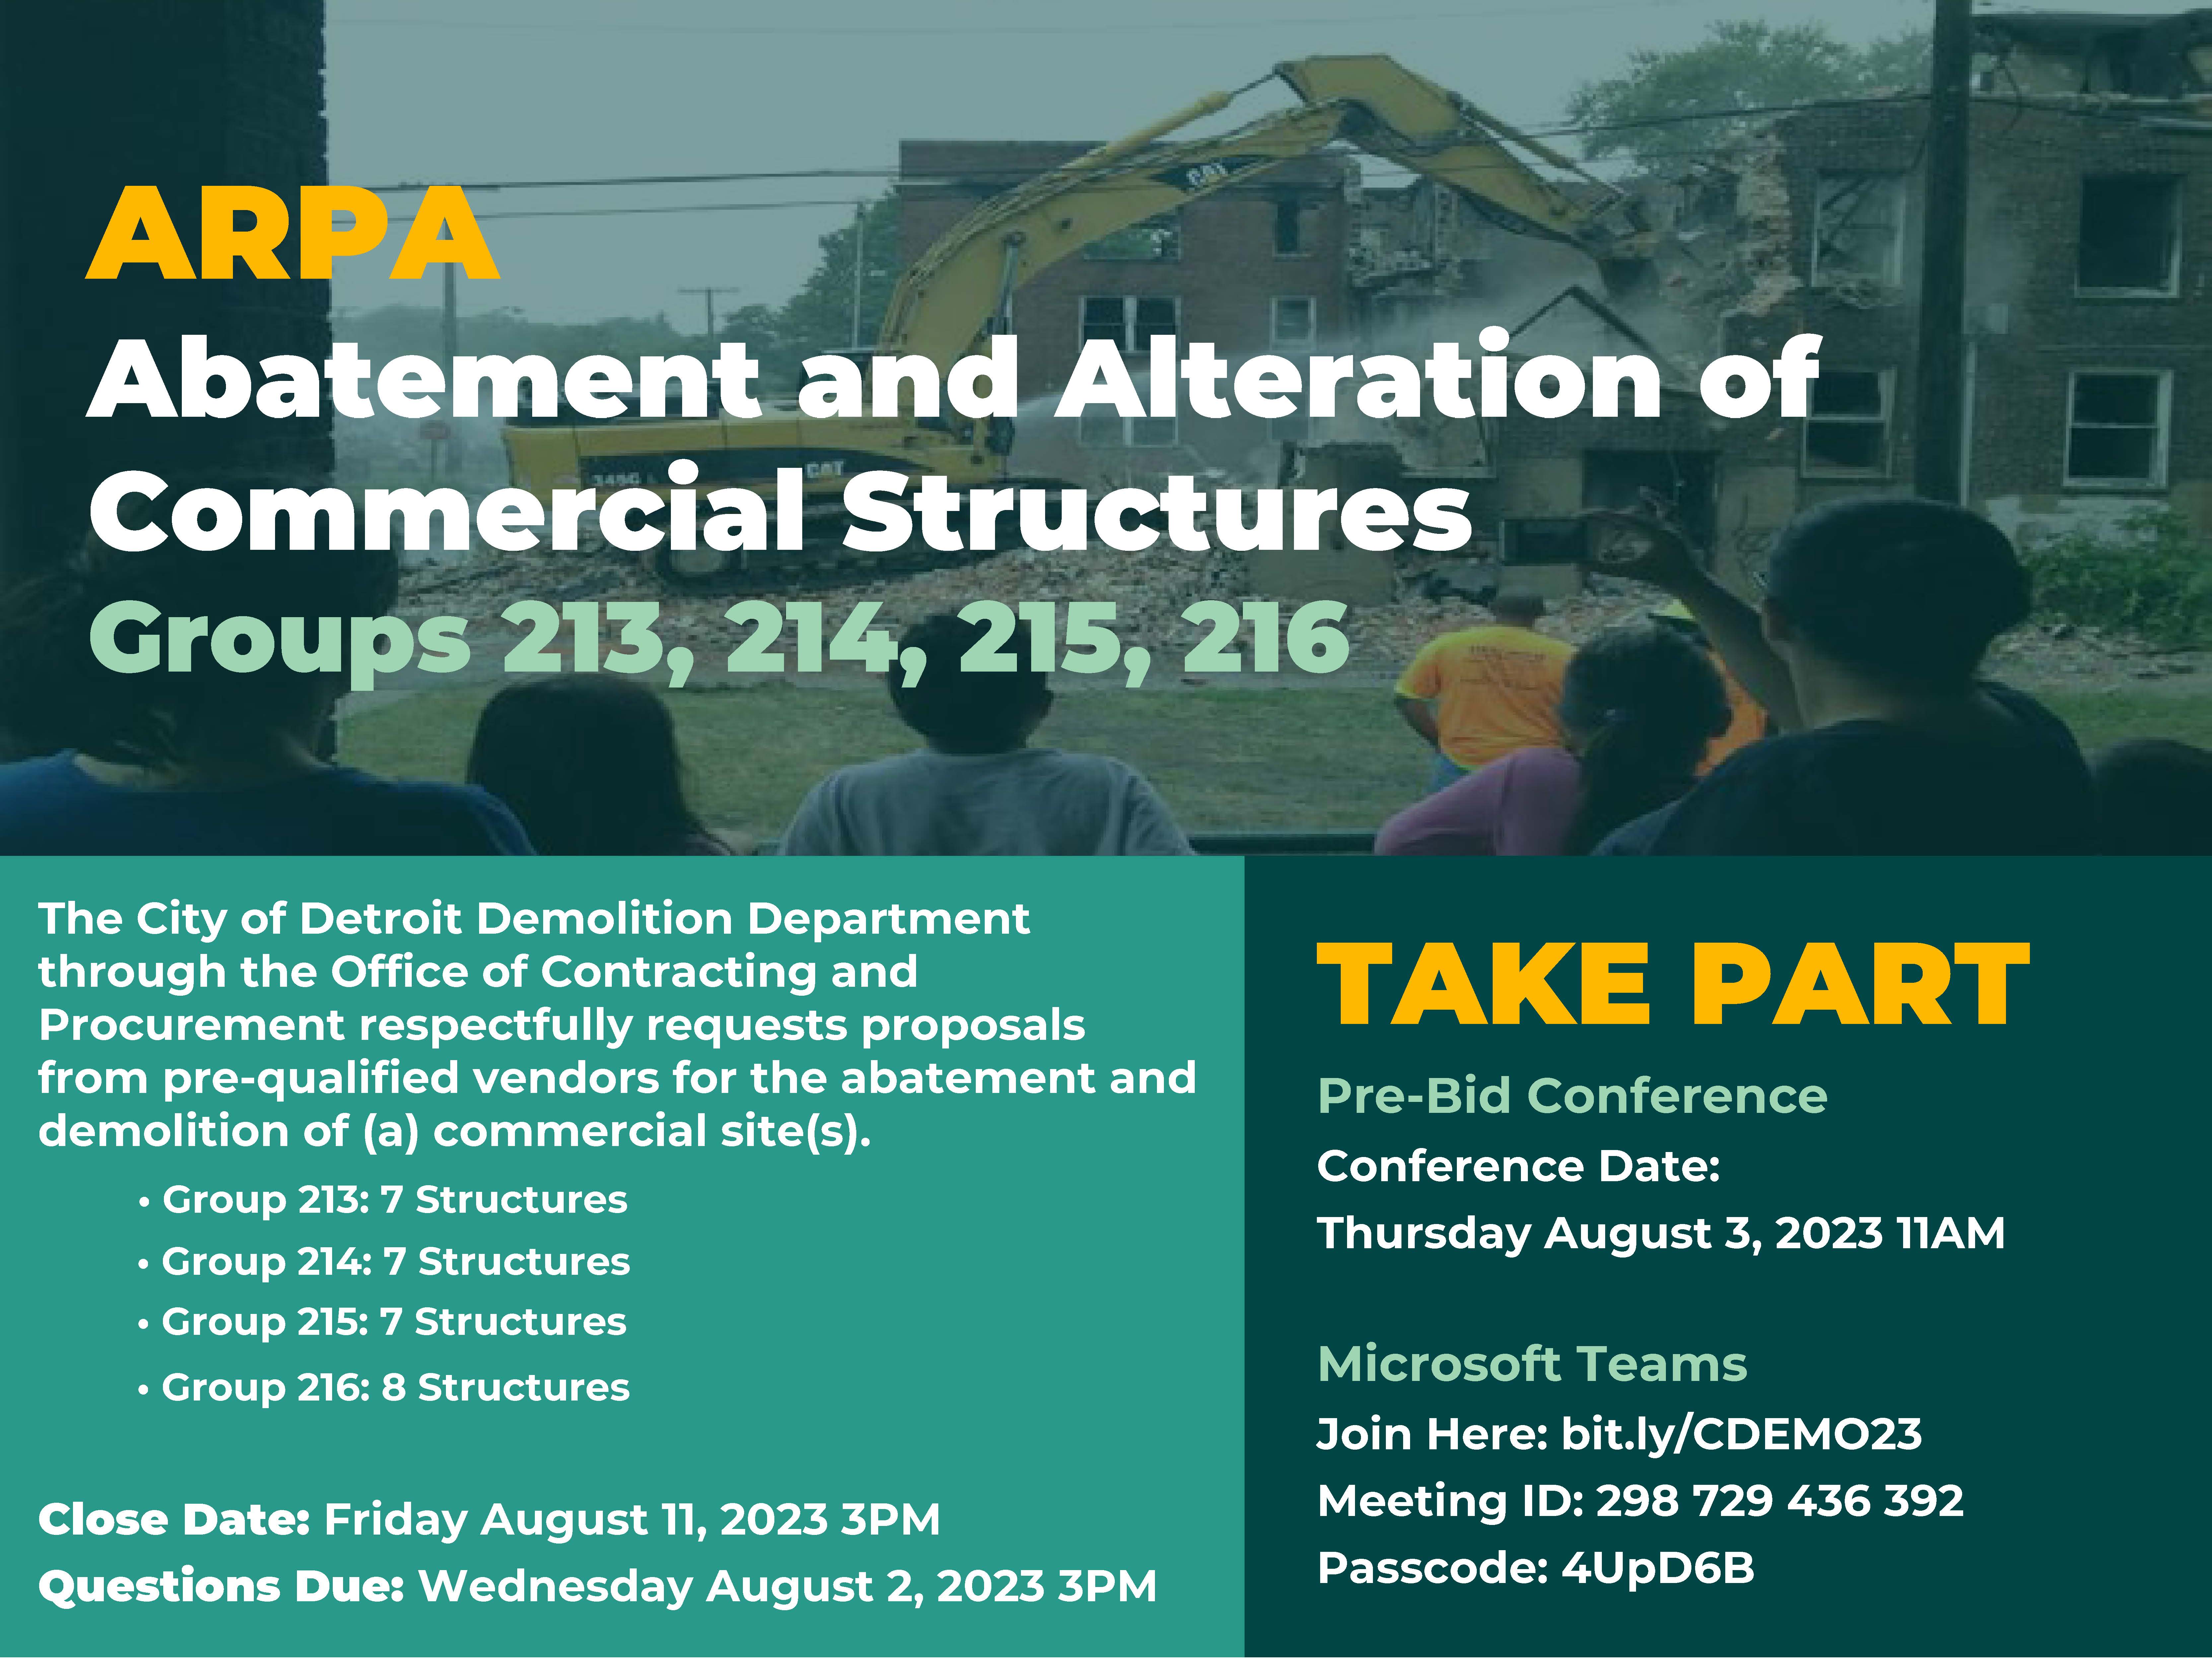 Take Part:  Abatement and Alteration of Commercial Structures Groups 213, 214, 215, 216